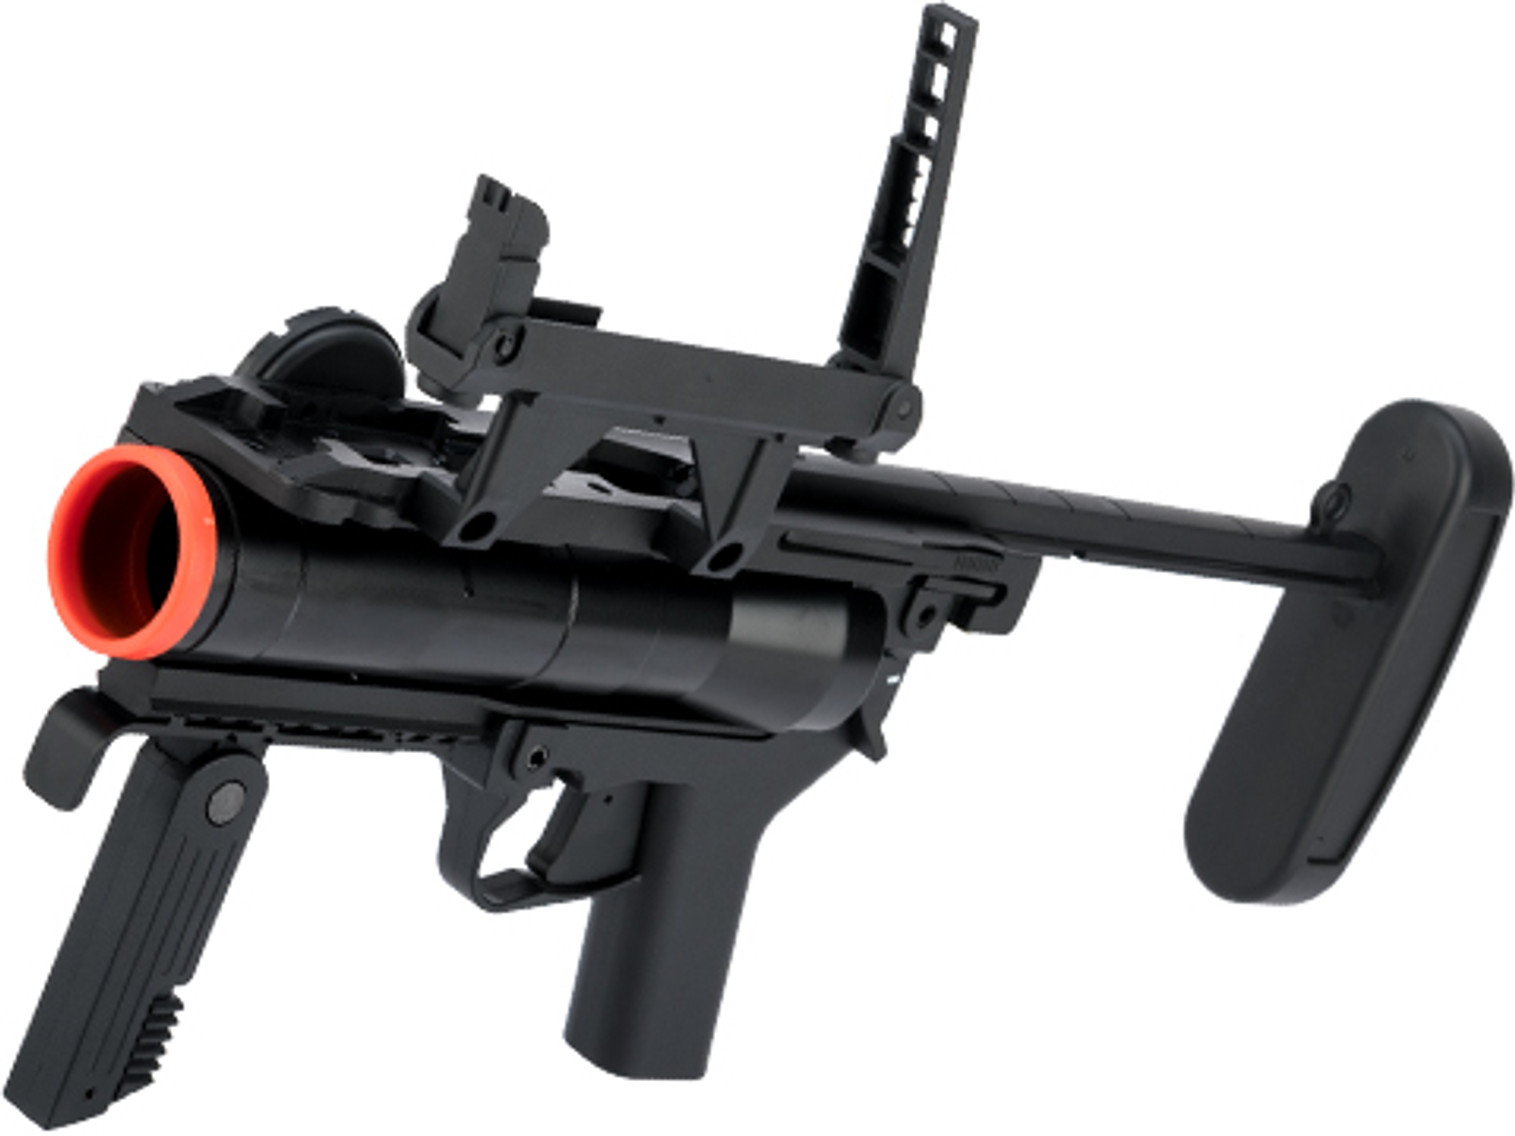 ARES M320 40mm Airsoft Grenade Launcher - Black